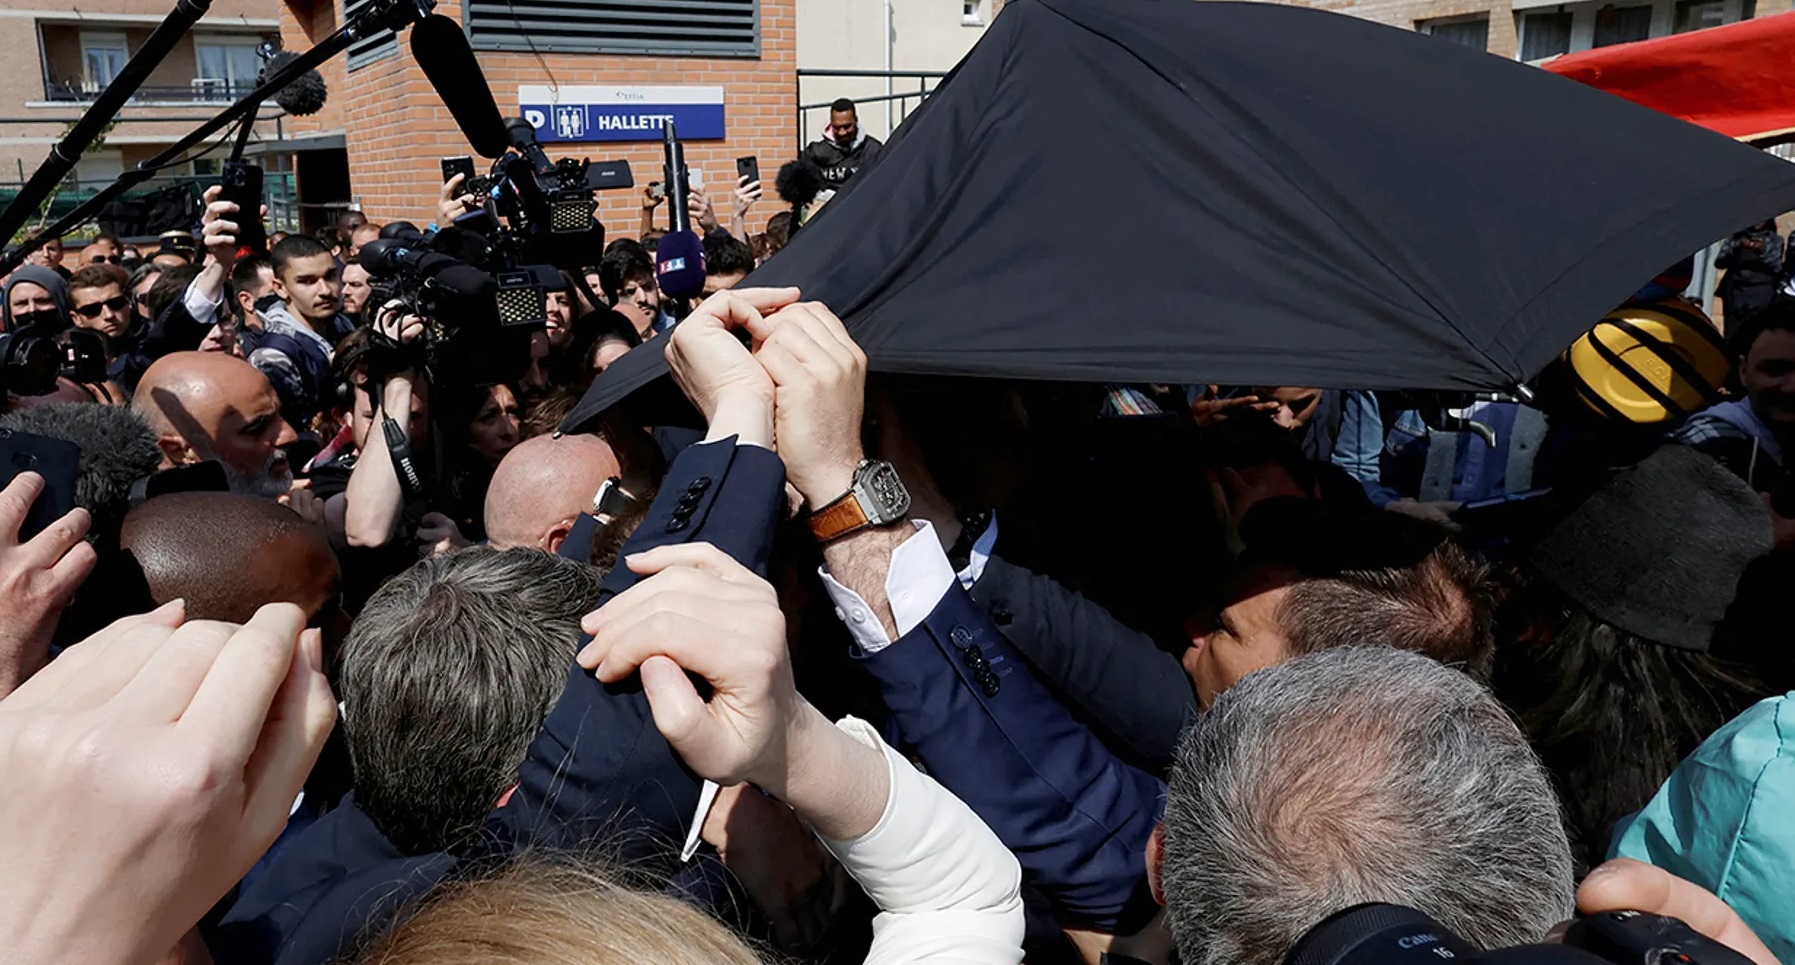 Security services cover Emmanuel Macron after a projectile is launched